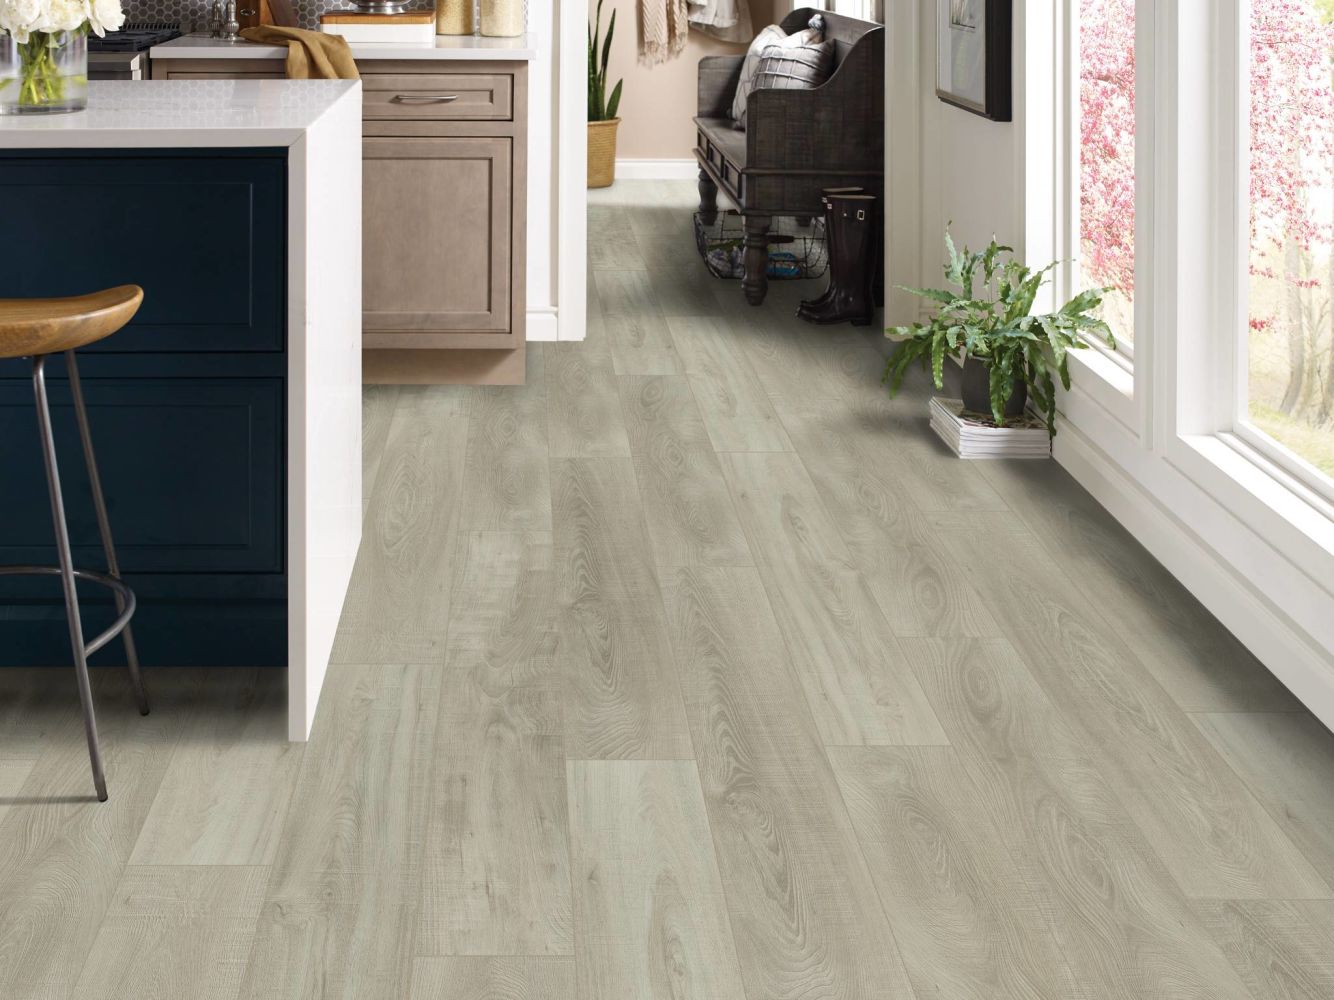 Shaw Floors Pulte Home Hard Surfaces Almargo HD Plus Trevi 01026_PW756